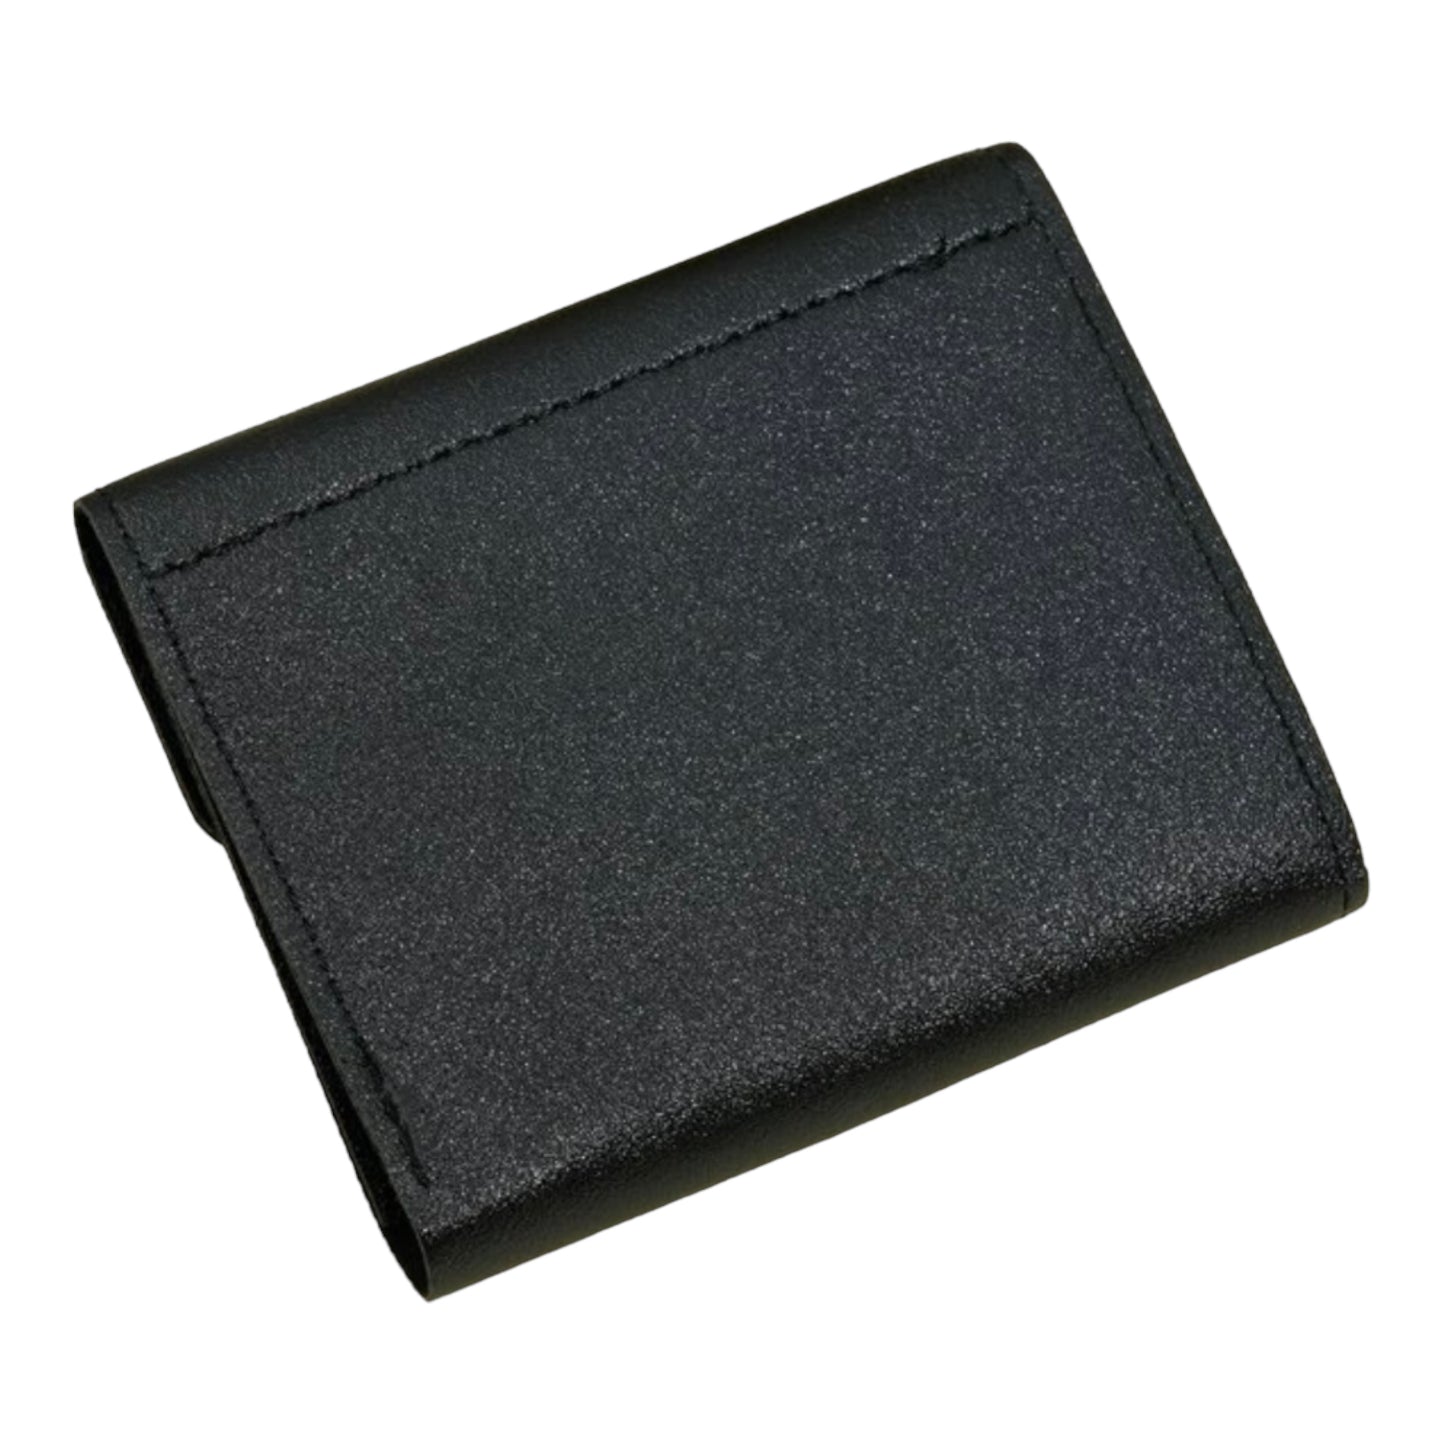 Black Trifold or Checkbook Wallet